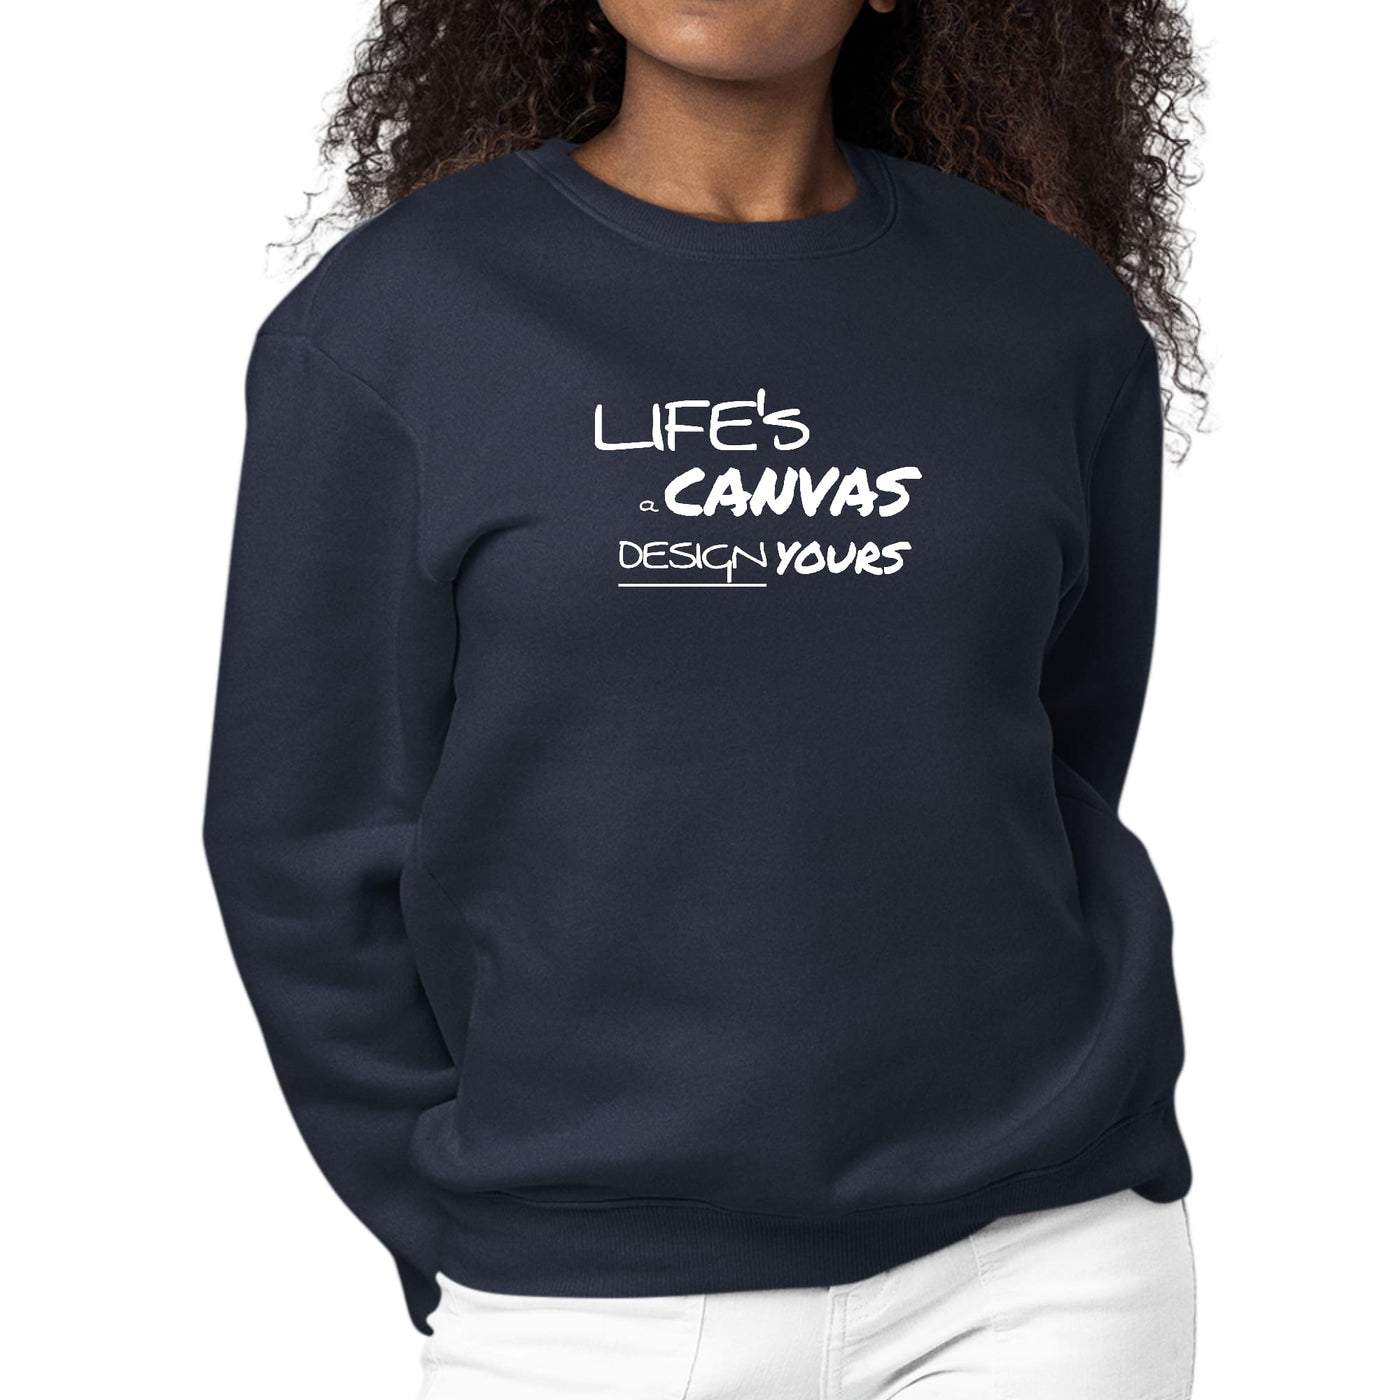 Womens Graphic Sweatshirt Life’s a Canvas Design Yours Motivational - Womens